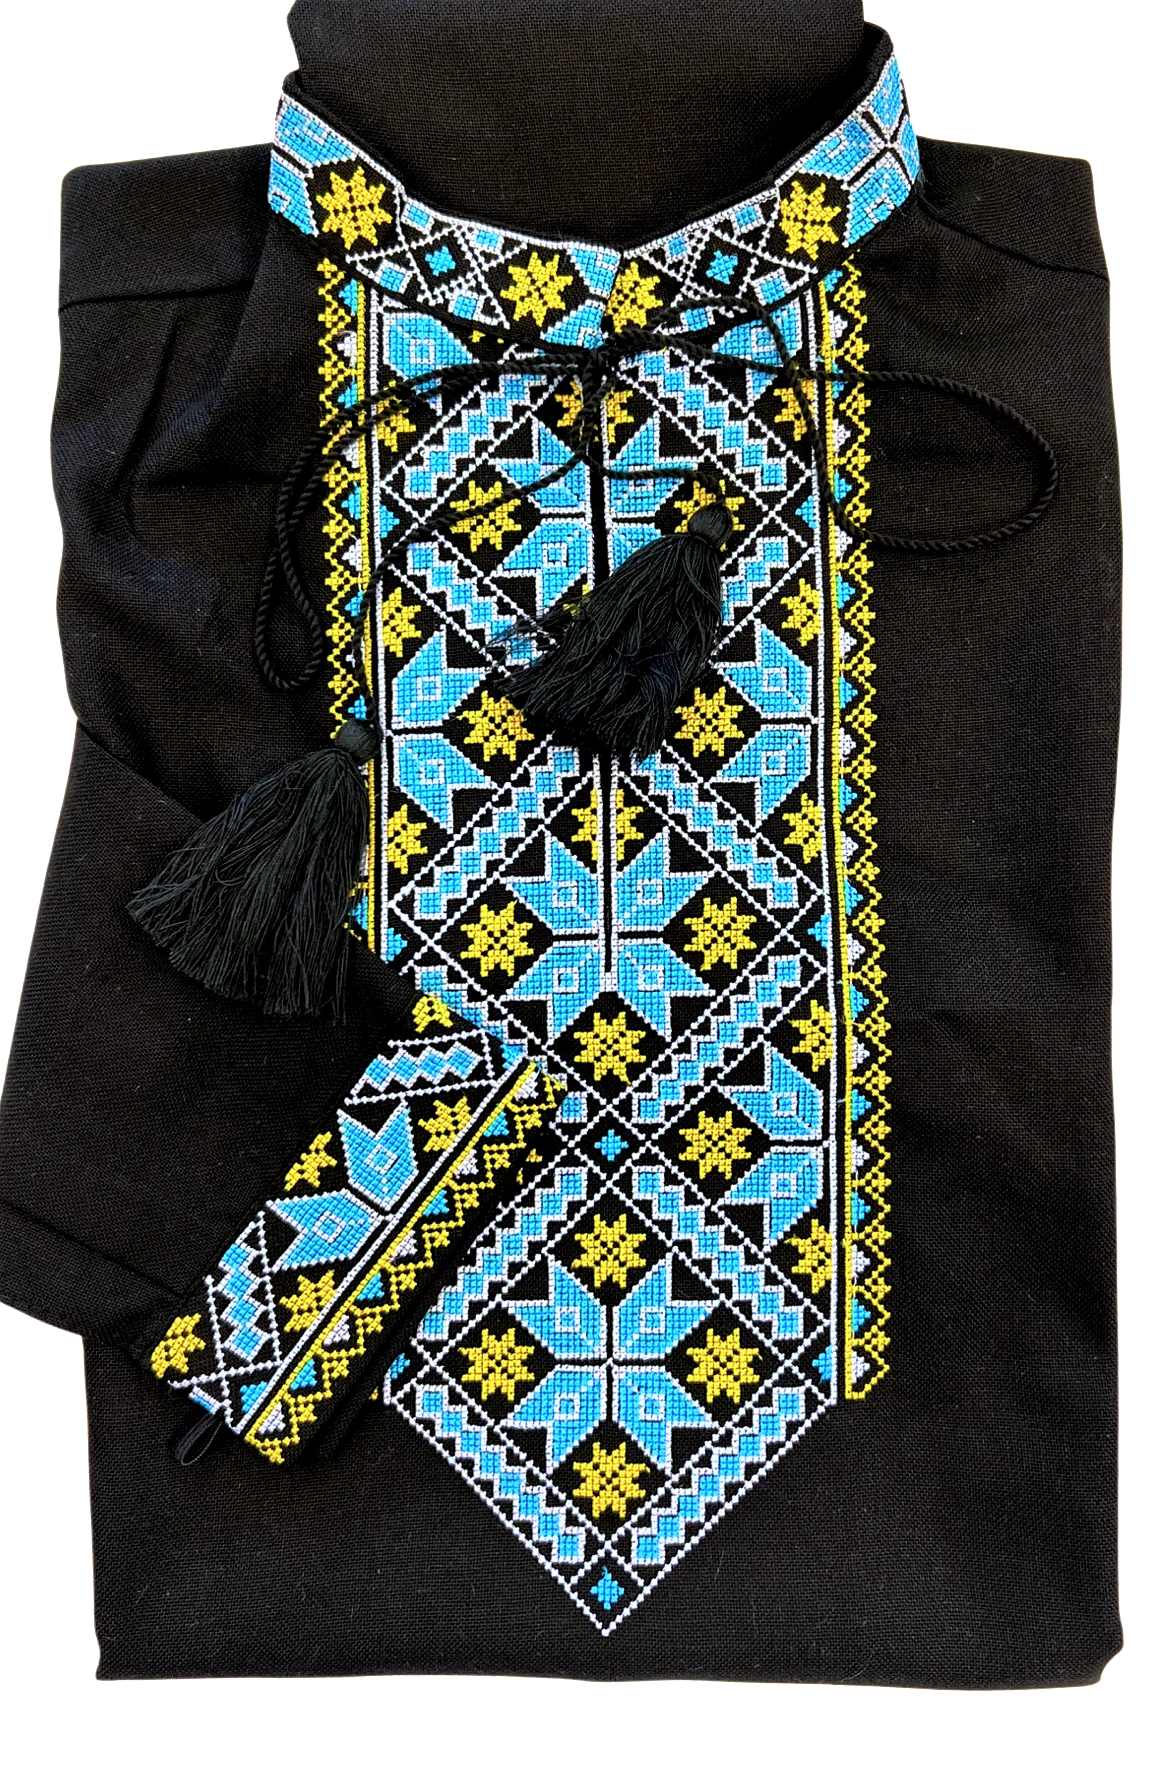 Men's black Vyshyvanka with blue and yellow embroidery